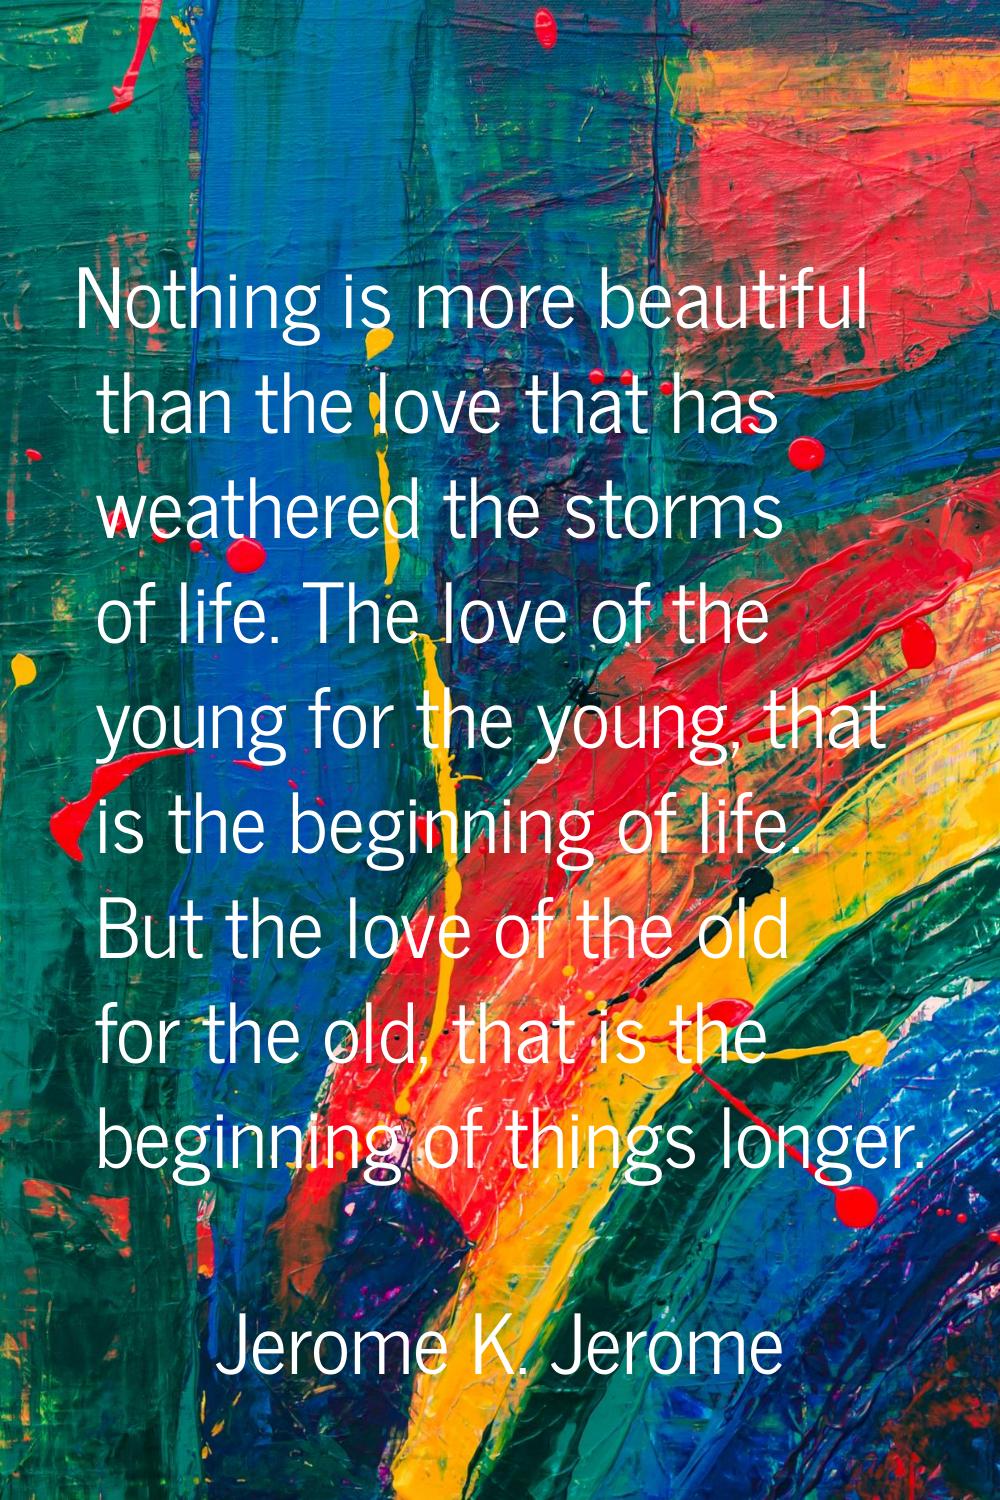 Nothing is more beautiful than the love that has weathered the storms of life. The love of the youn